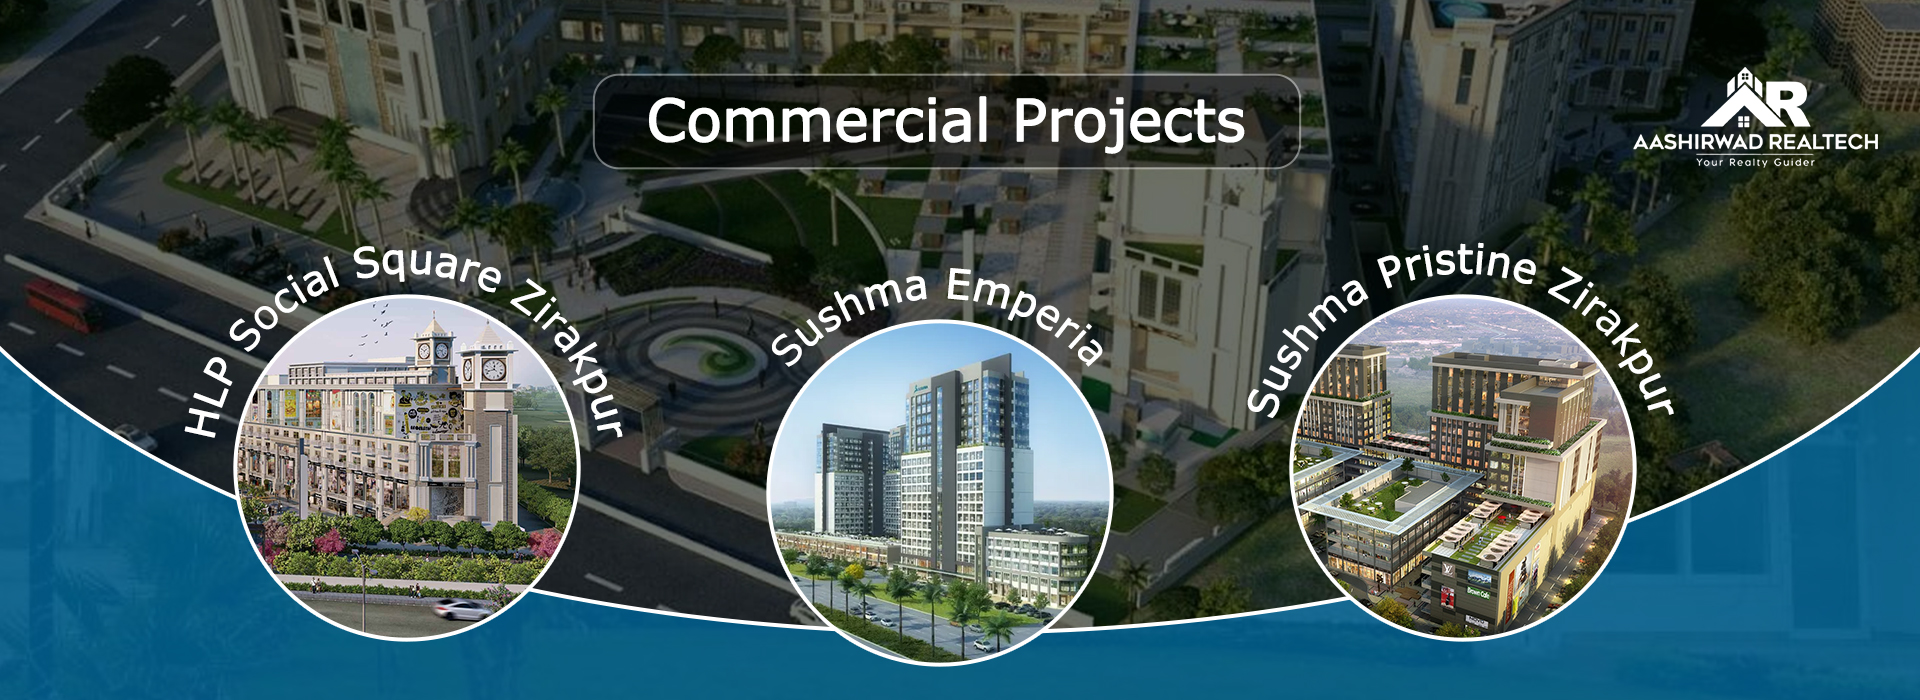 Commercial Projects Banner